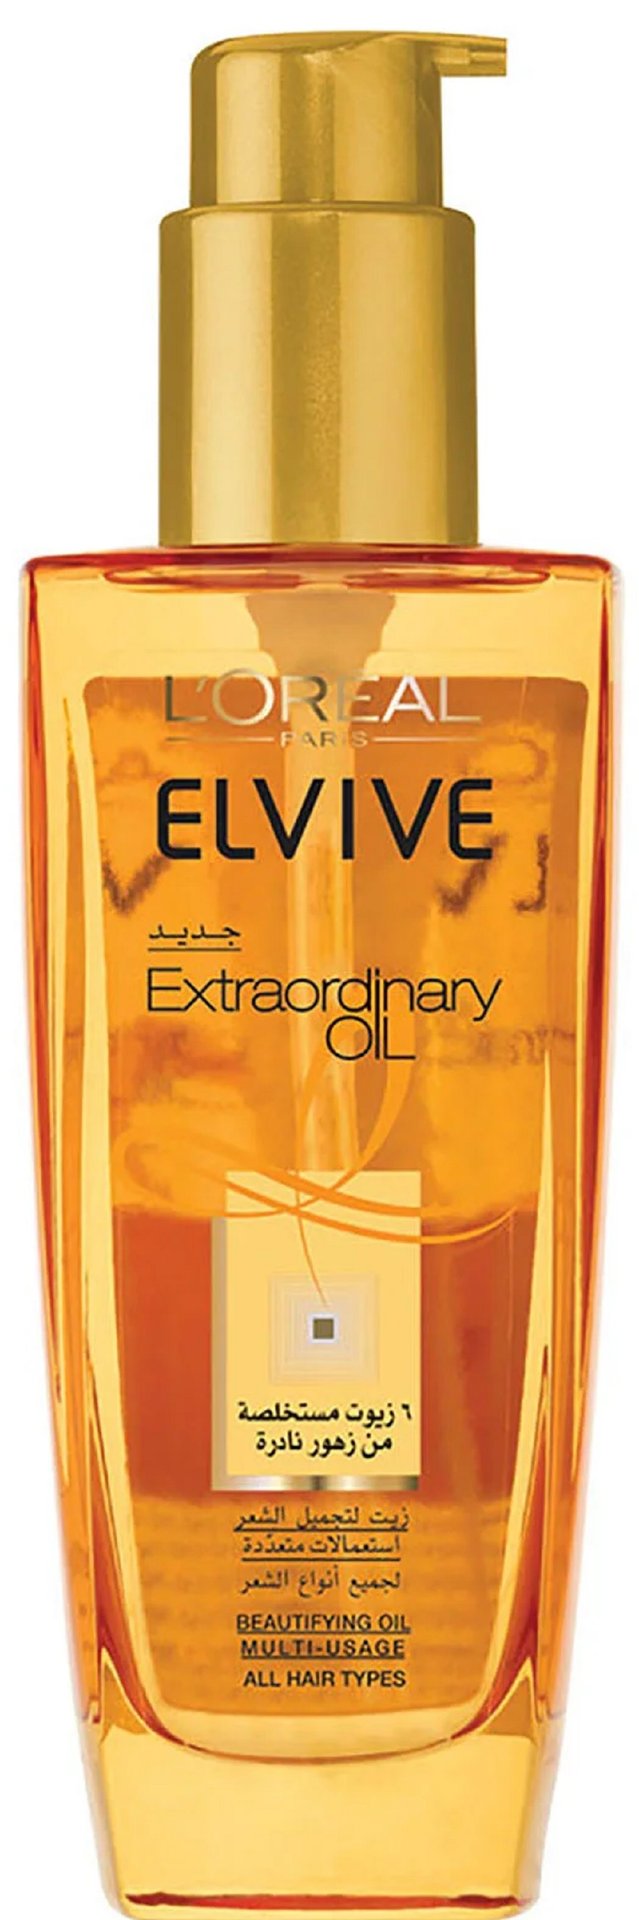 Loreal Paris Extraordinary Oil Serum 100 ml Online in India Buy at Best  Price from Firstcrycom  10670763